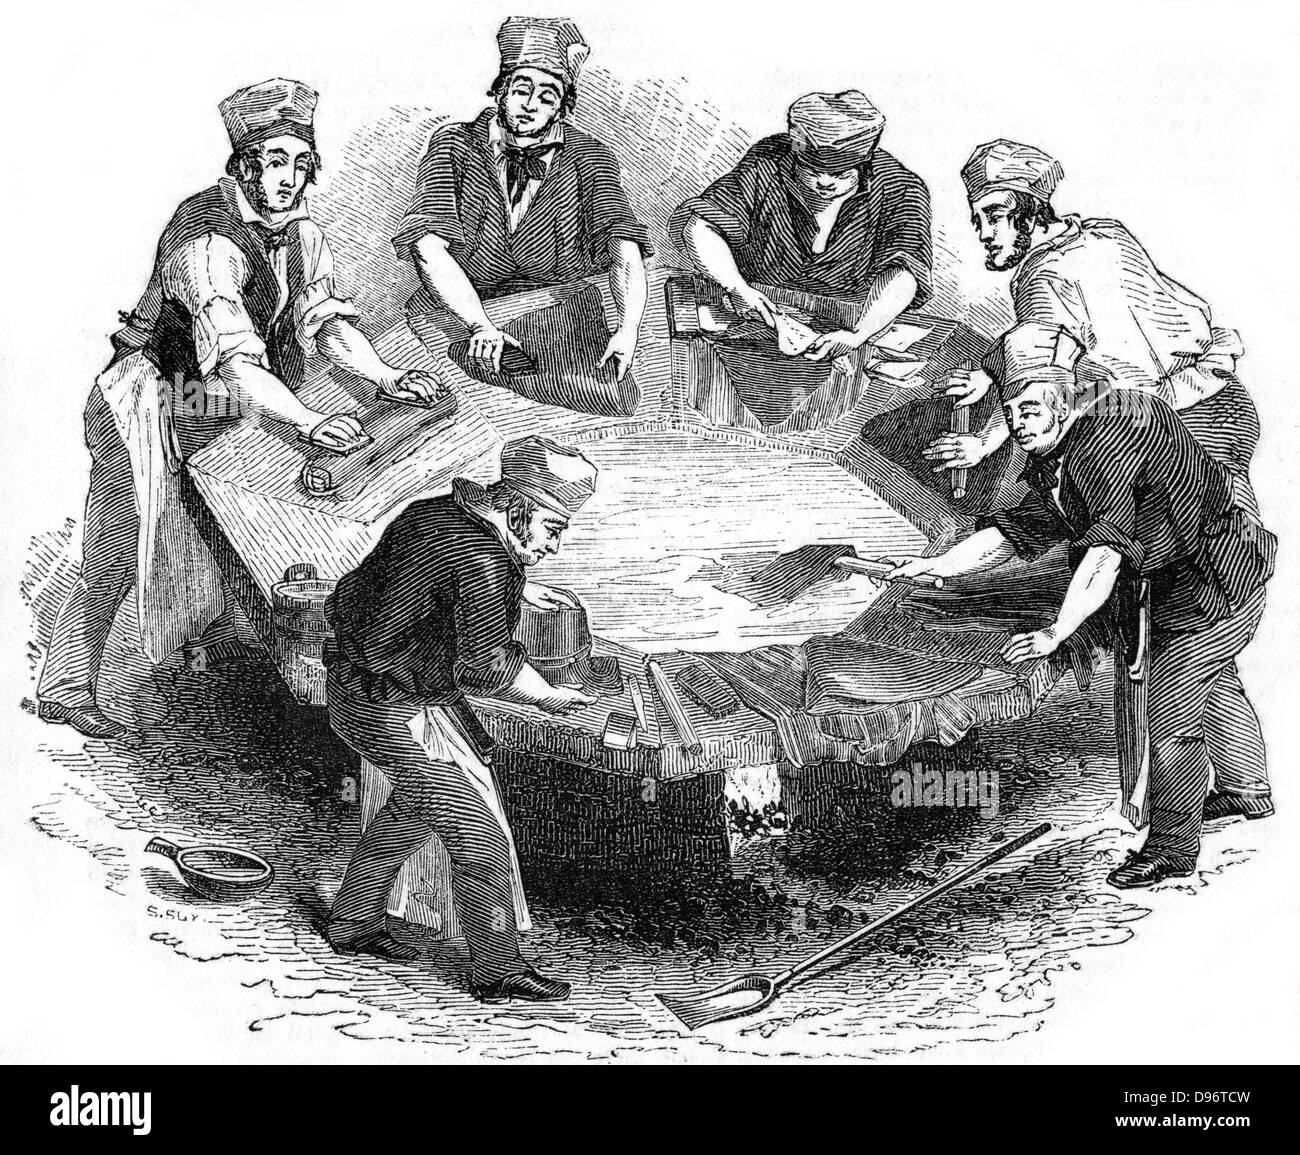 Beaver hats; 'felting' the body of the hats in the 'kettle'. Mercury was used during the manufacture and many hatters suffered from the uncontrollable shaking typical of mercury poisoning. From 'The Penny Magazine', London, 1841. Woodcut Stock Photo